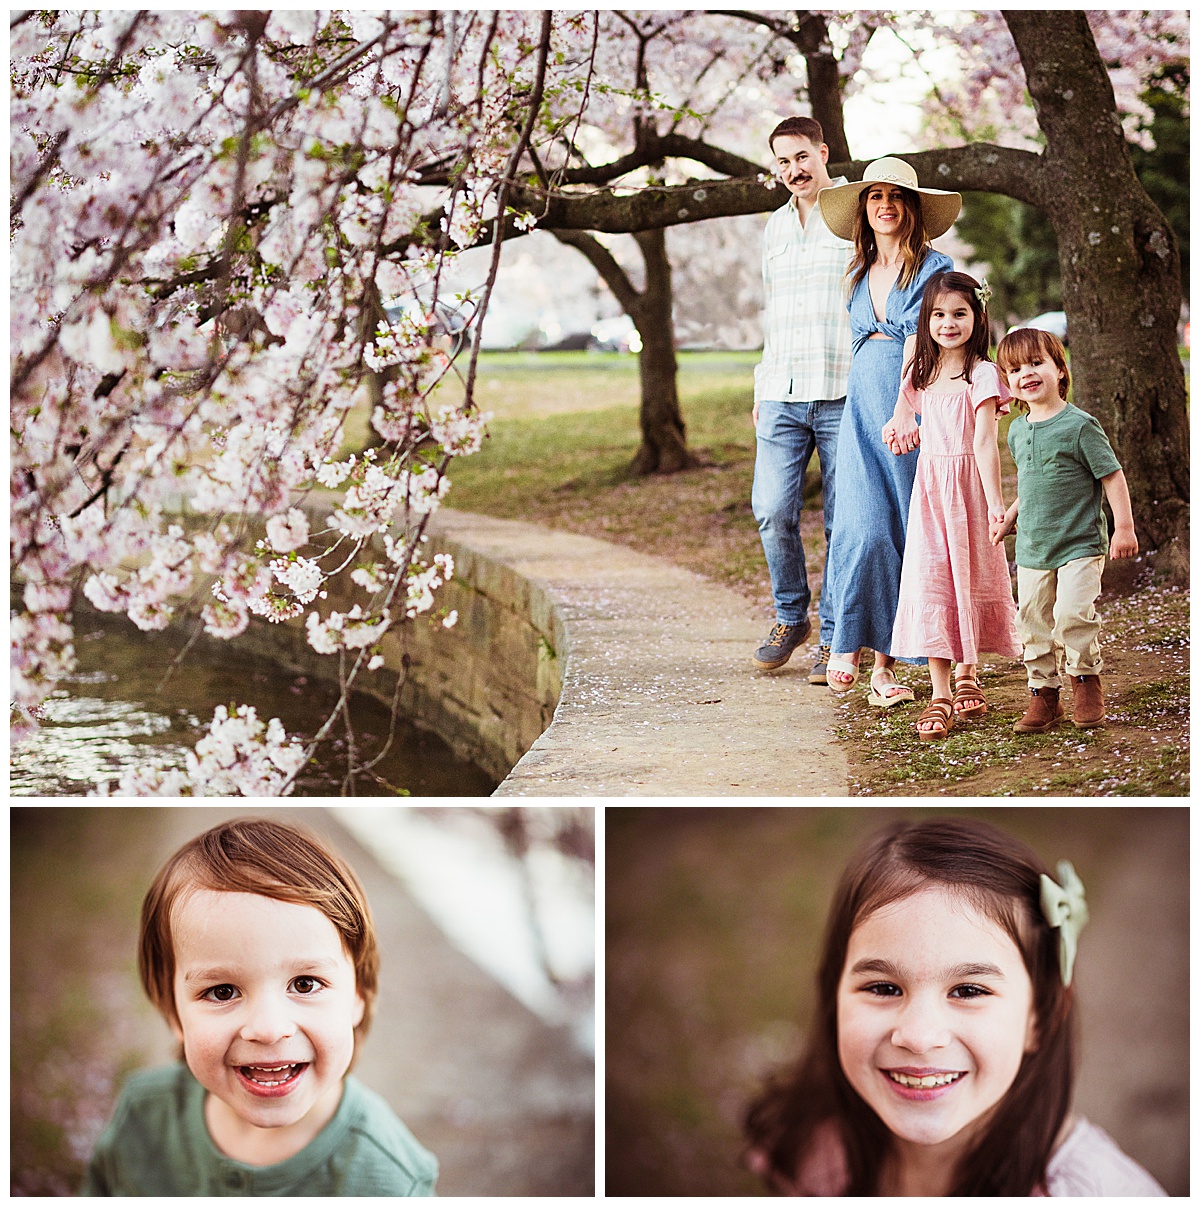 Stunning family smile together near the Cherry Blossoms In Washington DC